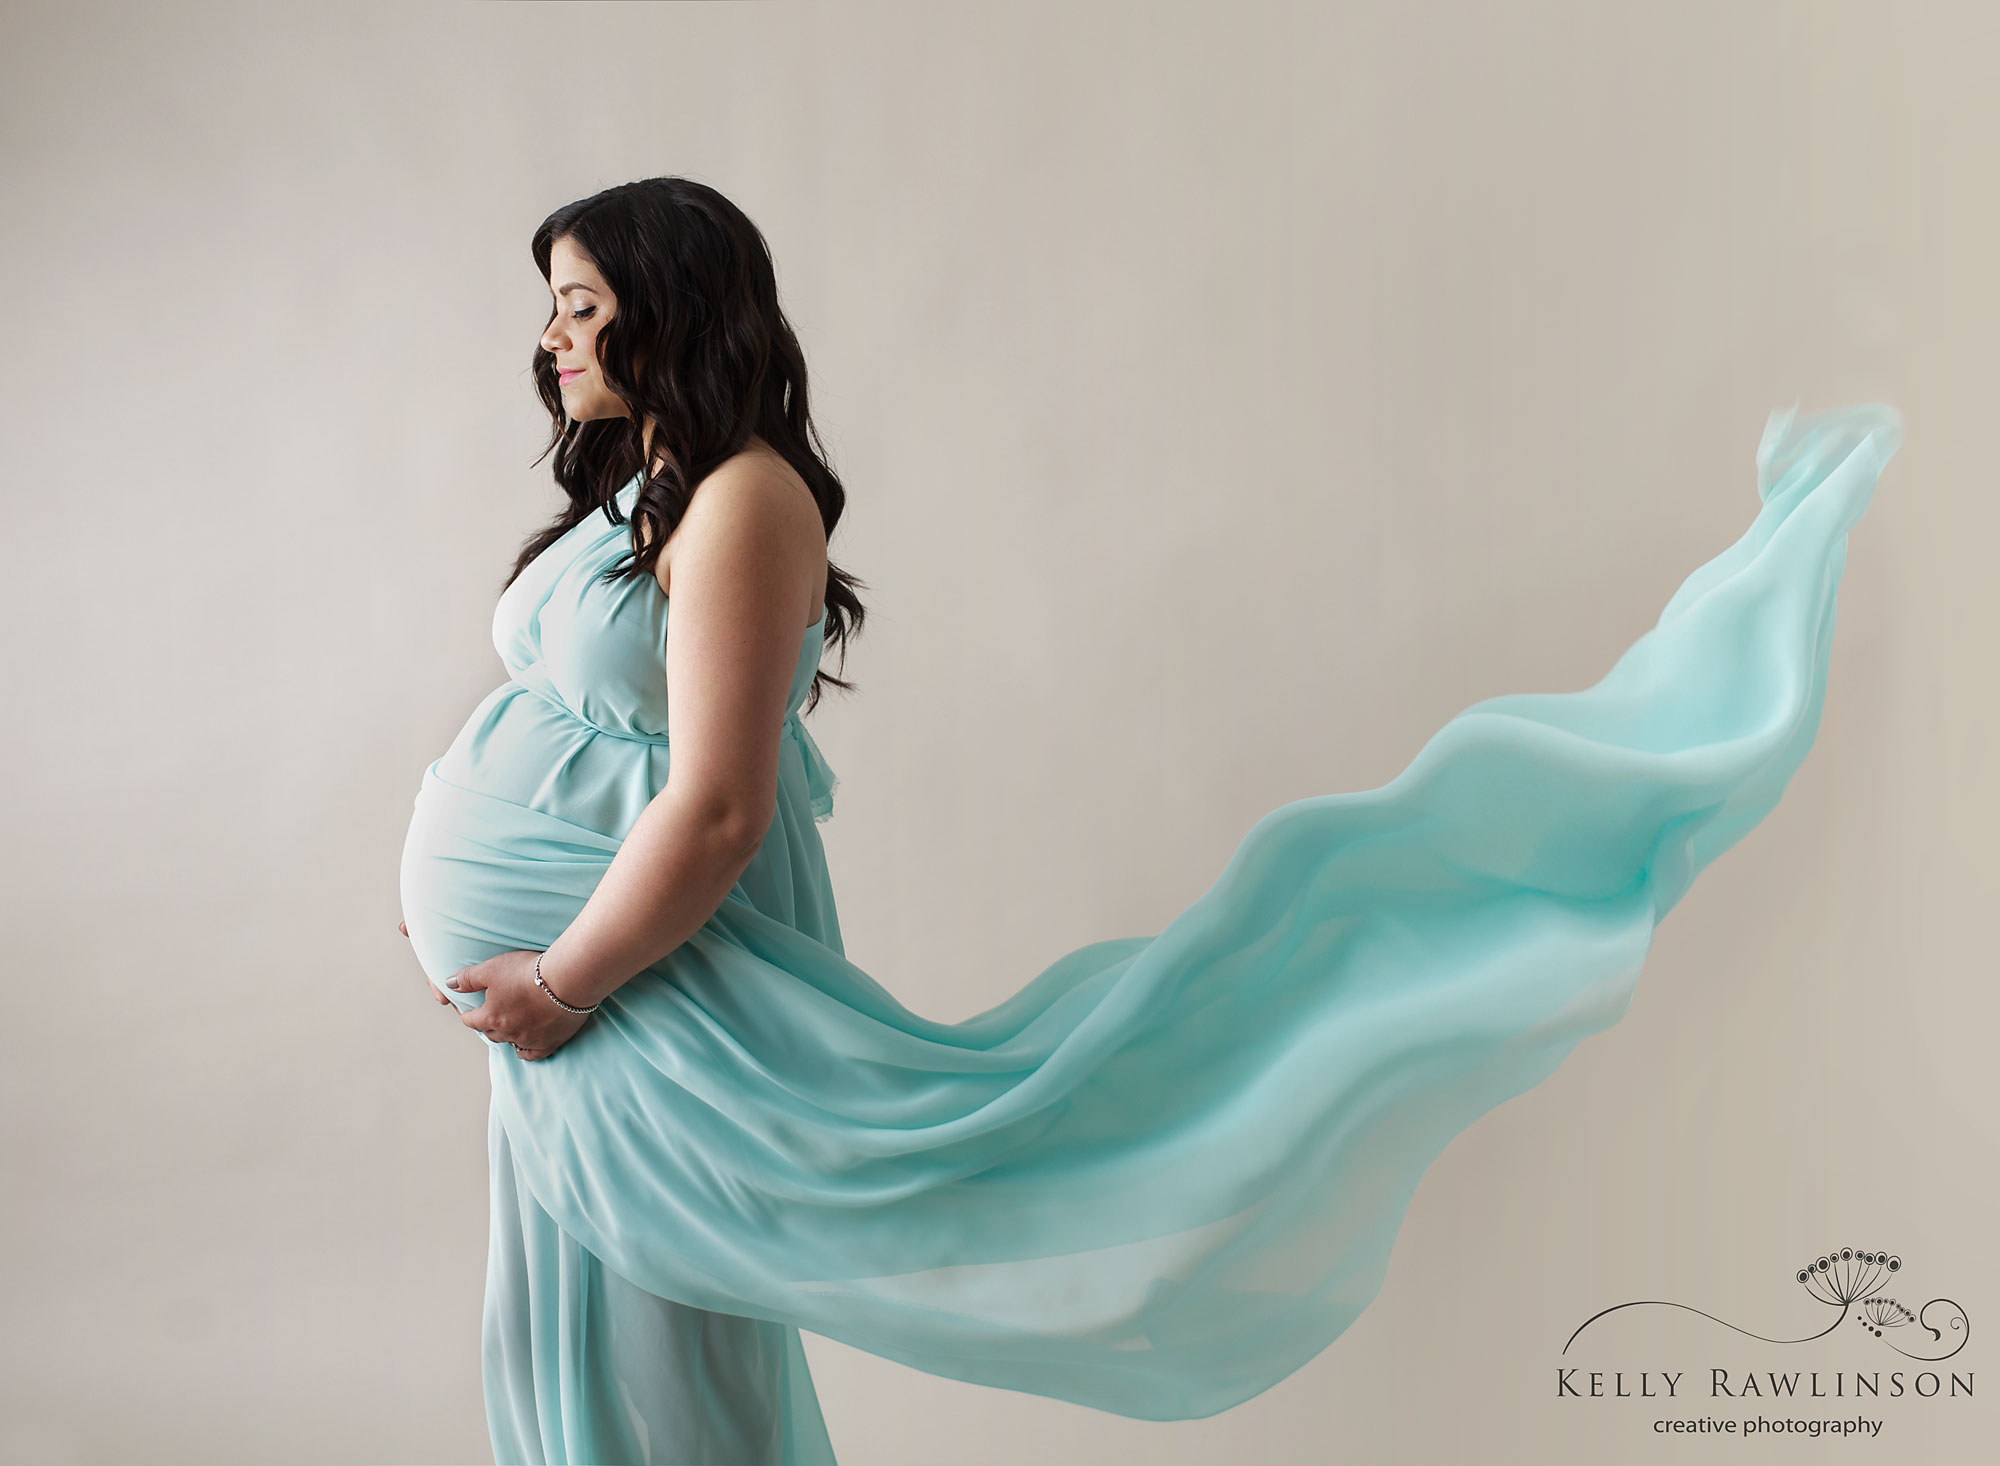 fabric dress blowing behind pregnant woman, professional photography in newmarket, keswick, sutton